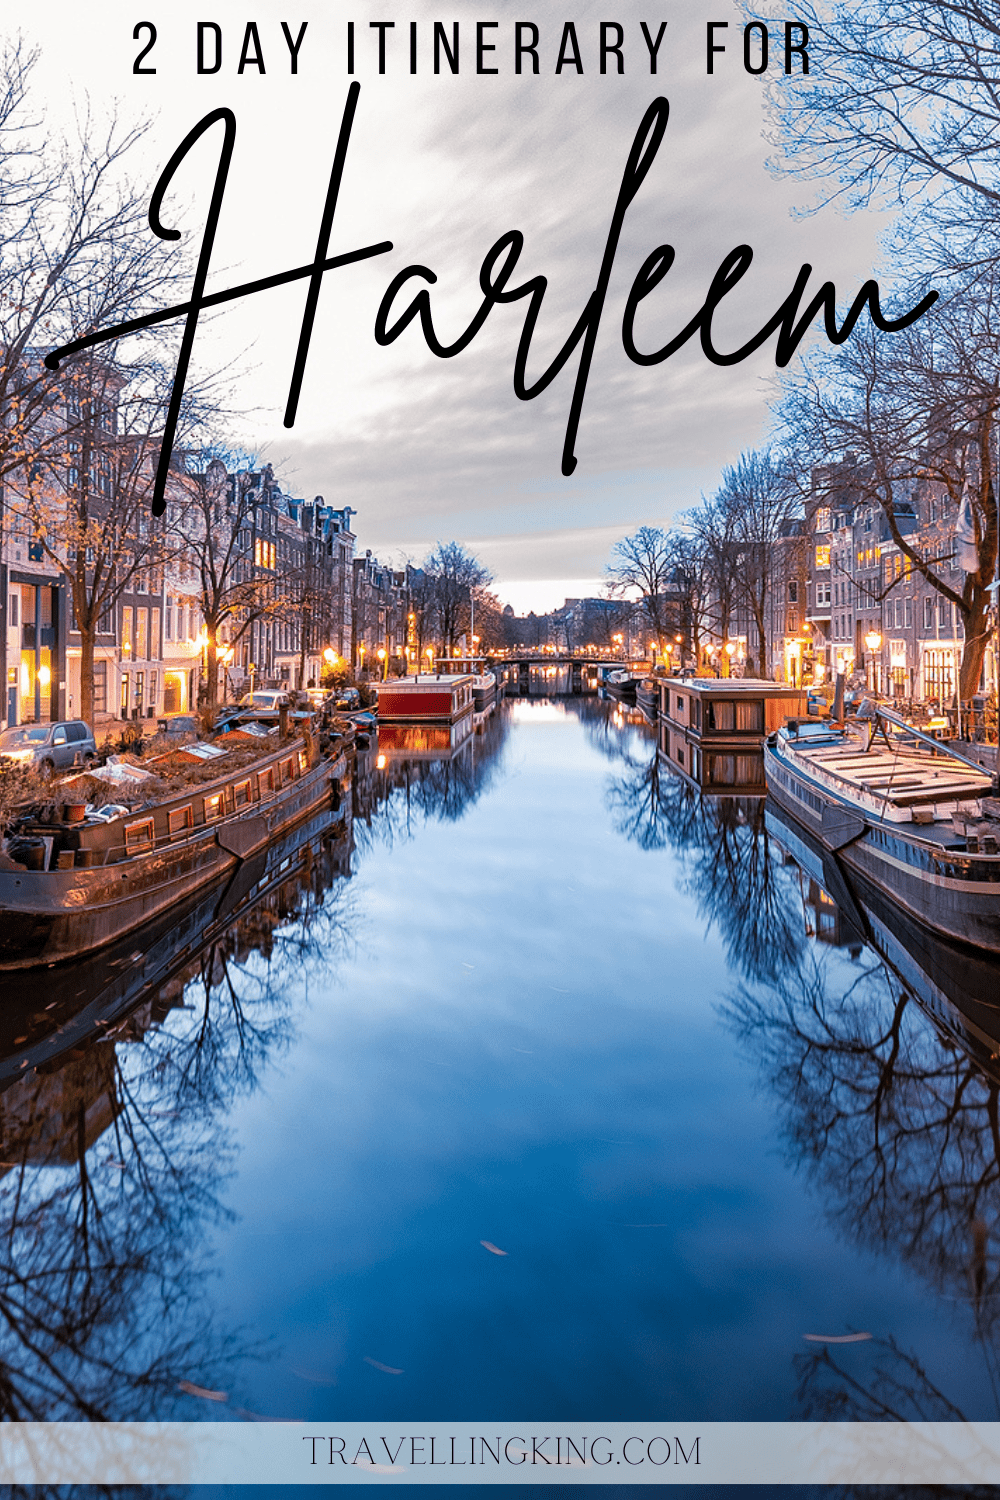 48 hours in Haarlem - 2 Day Itinerary